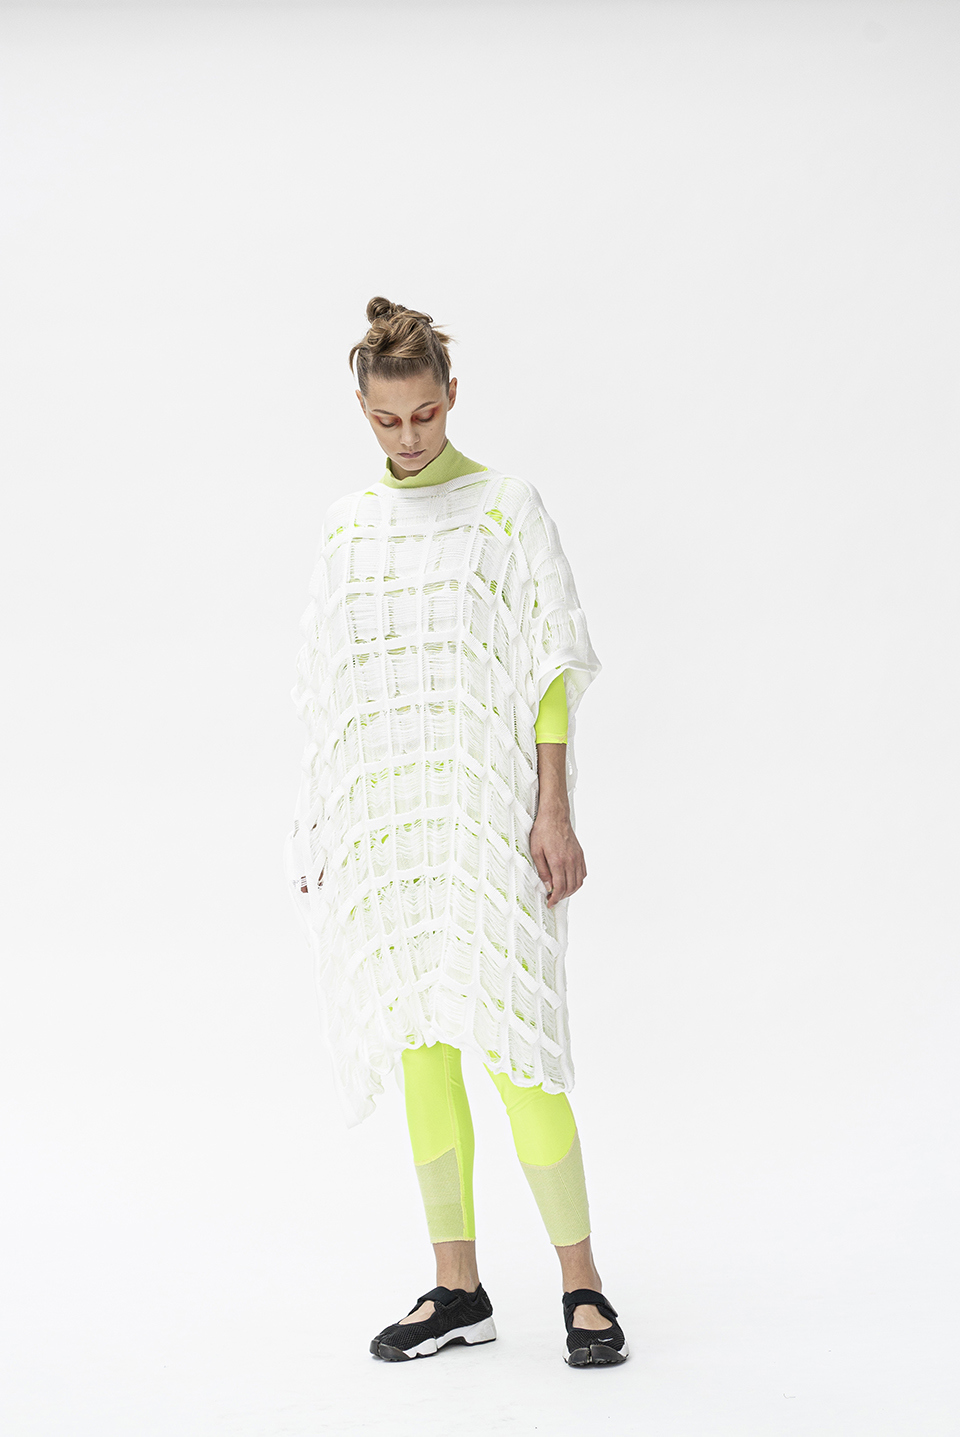 Image of collection by Jennifer Jonsson Lundedal